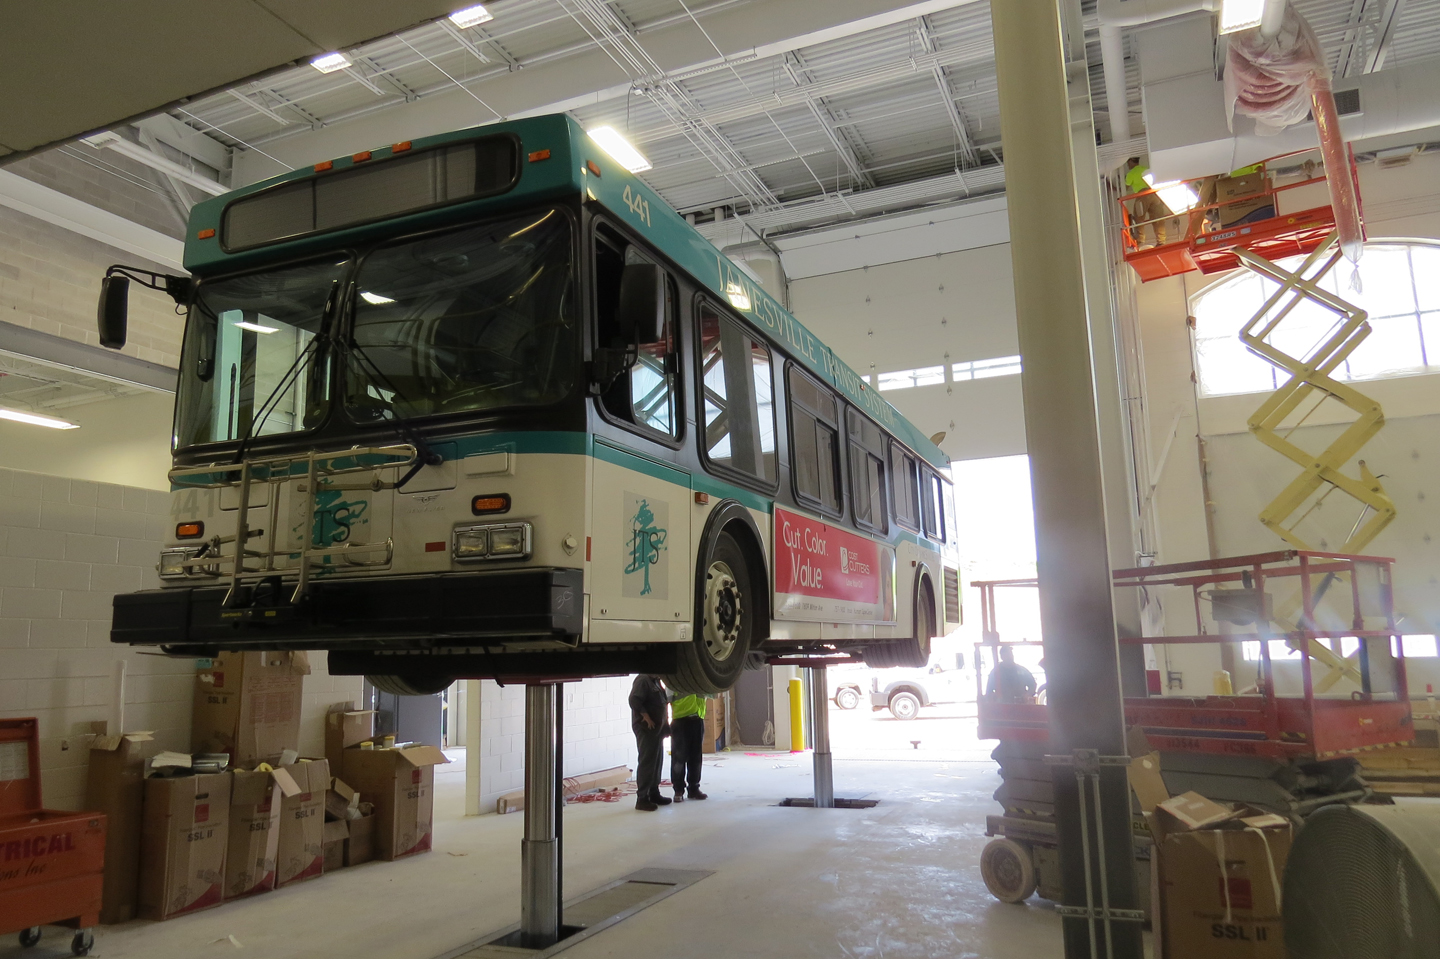 Wisconsin mass transit systems rely on Stertil-Koni inground DIAMONDLIFTs from Midwest Equipment Specialists